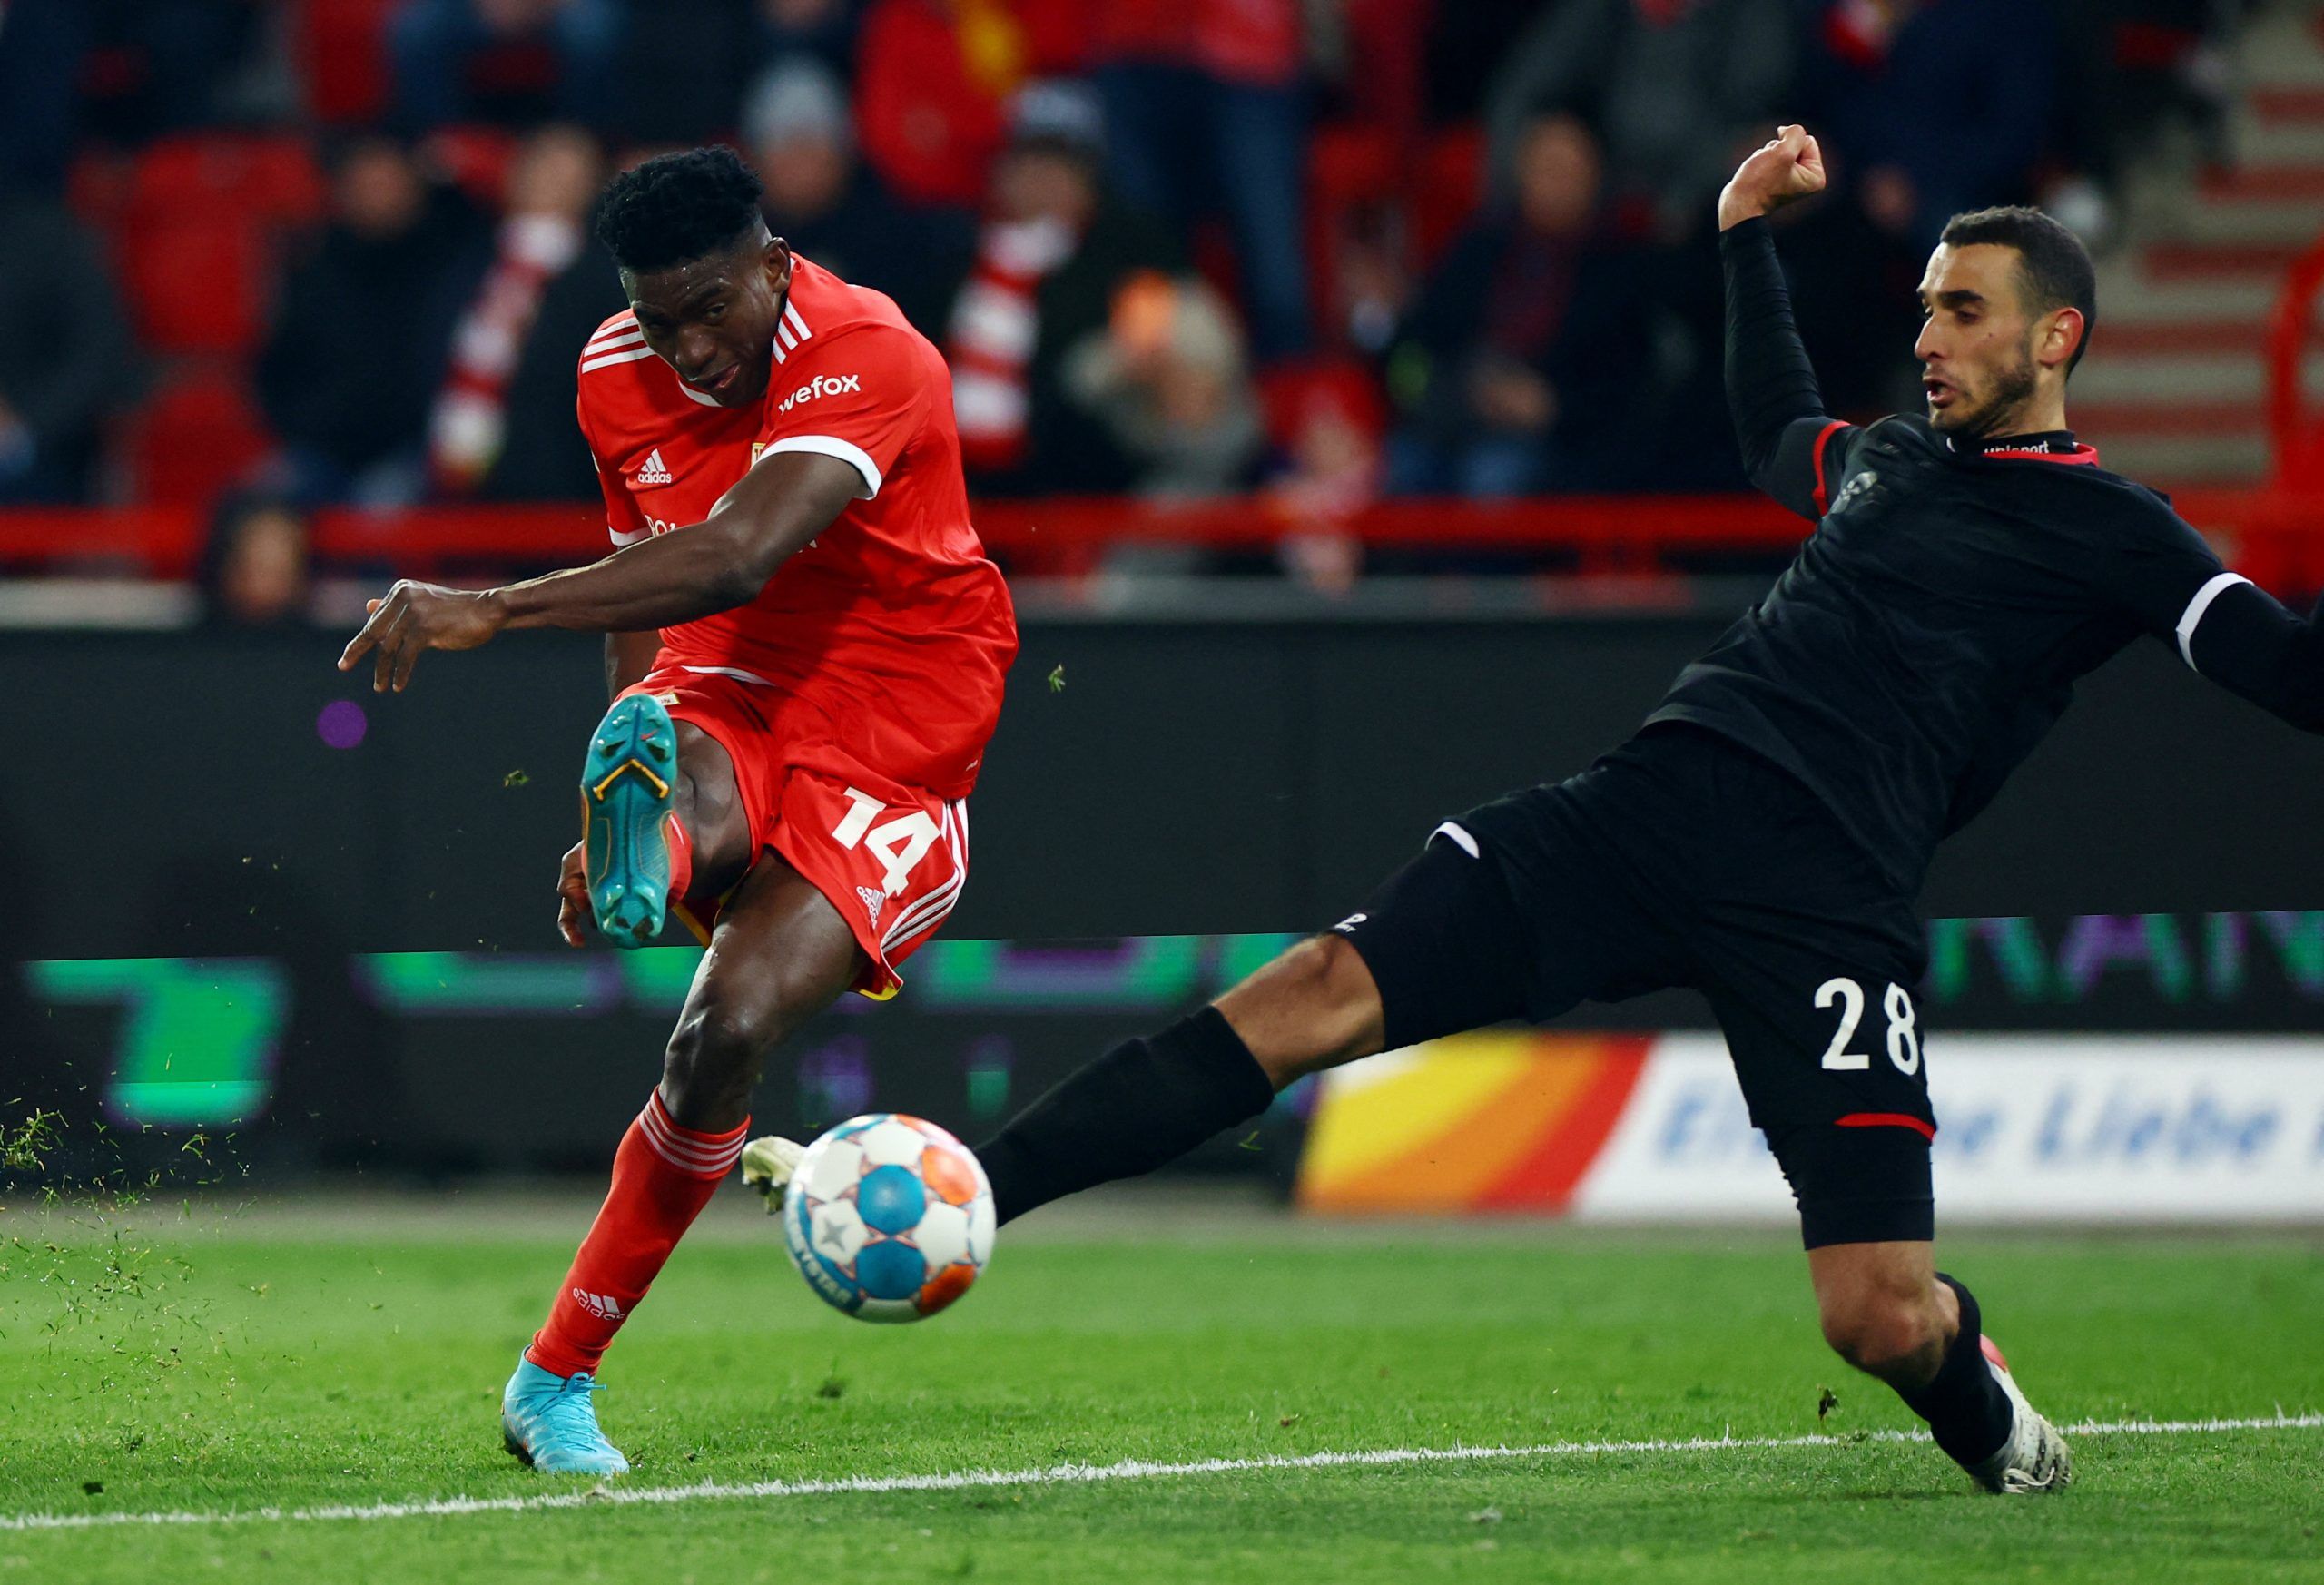 Soccer Football - Bundesliga - 1. FC Union Berlin v FC Cologne - Stadion An der Alten Forsterei, Berlin, Germany - April 1, 2022 1. FC Union Berlin's Taiwo Awoniyi in action with FC Cologne's Ellyes Skhiri REUTERS/Lisi Niesner DFL REGULATIONS PROHIBIT ANY USE OF PHOTOGRAPHS AS IMAGE SEQUENCES AND/OR QUASI-VIDEO.